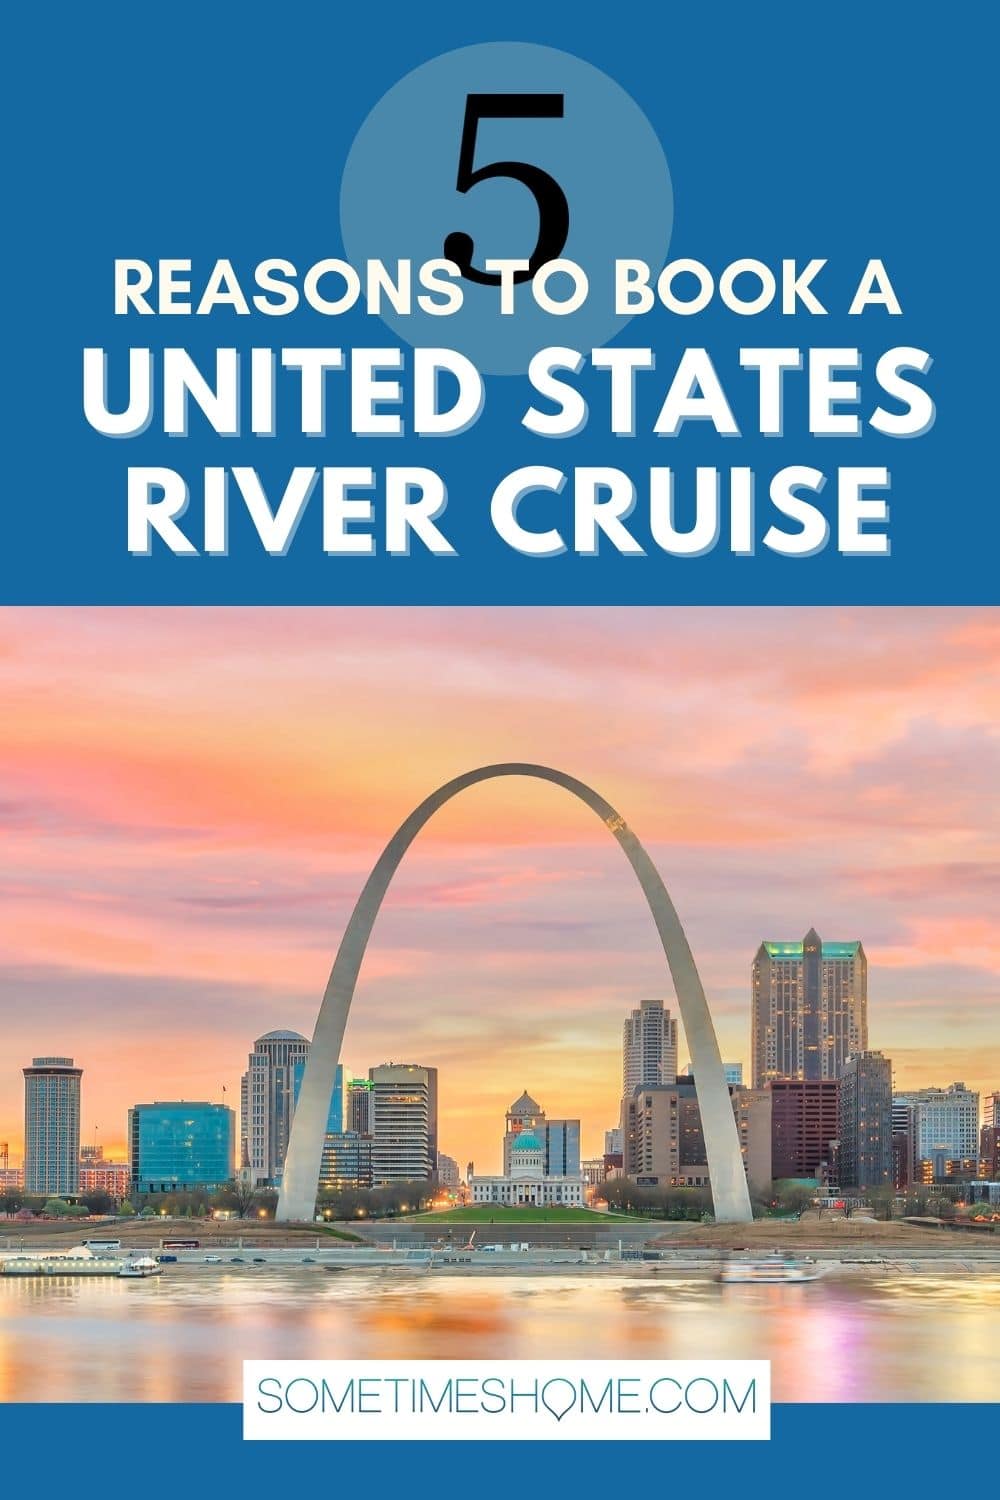 Photo of the St. Louis arch with river with Pinterest words overlaid on the text that reads, "5 reasons to book a United State River Cruise."